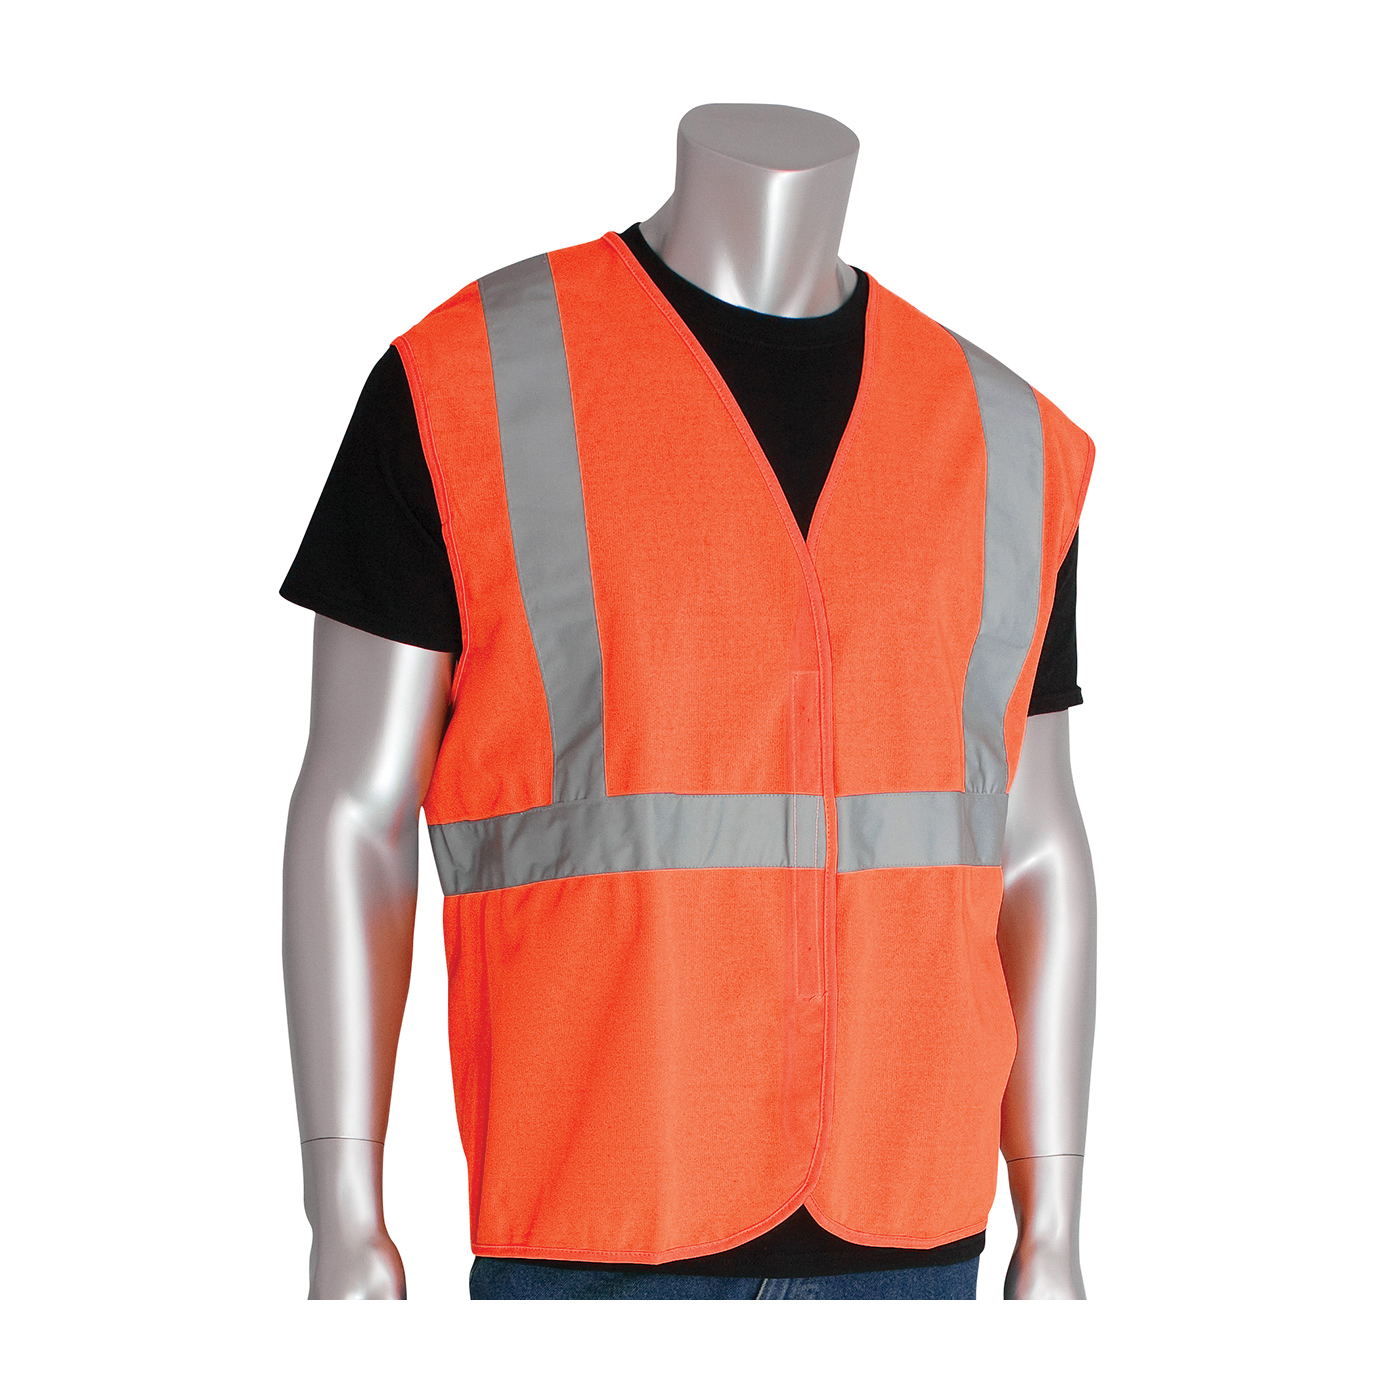 PIP® 302-WCENGOR-2X Solid Vest, 2XL, Hi-Viz Orange, Polyester, Hook and Loop Closure, ANSI Class: Class 2, Specifications Met: ANSI 107 Type R